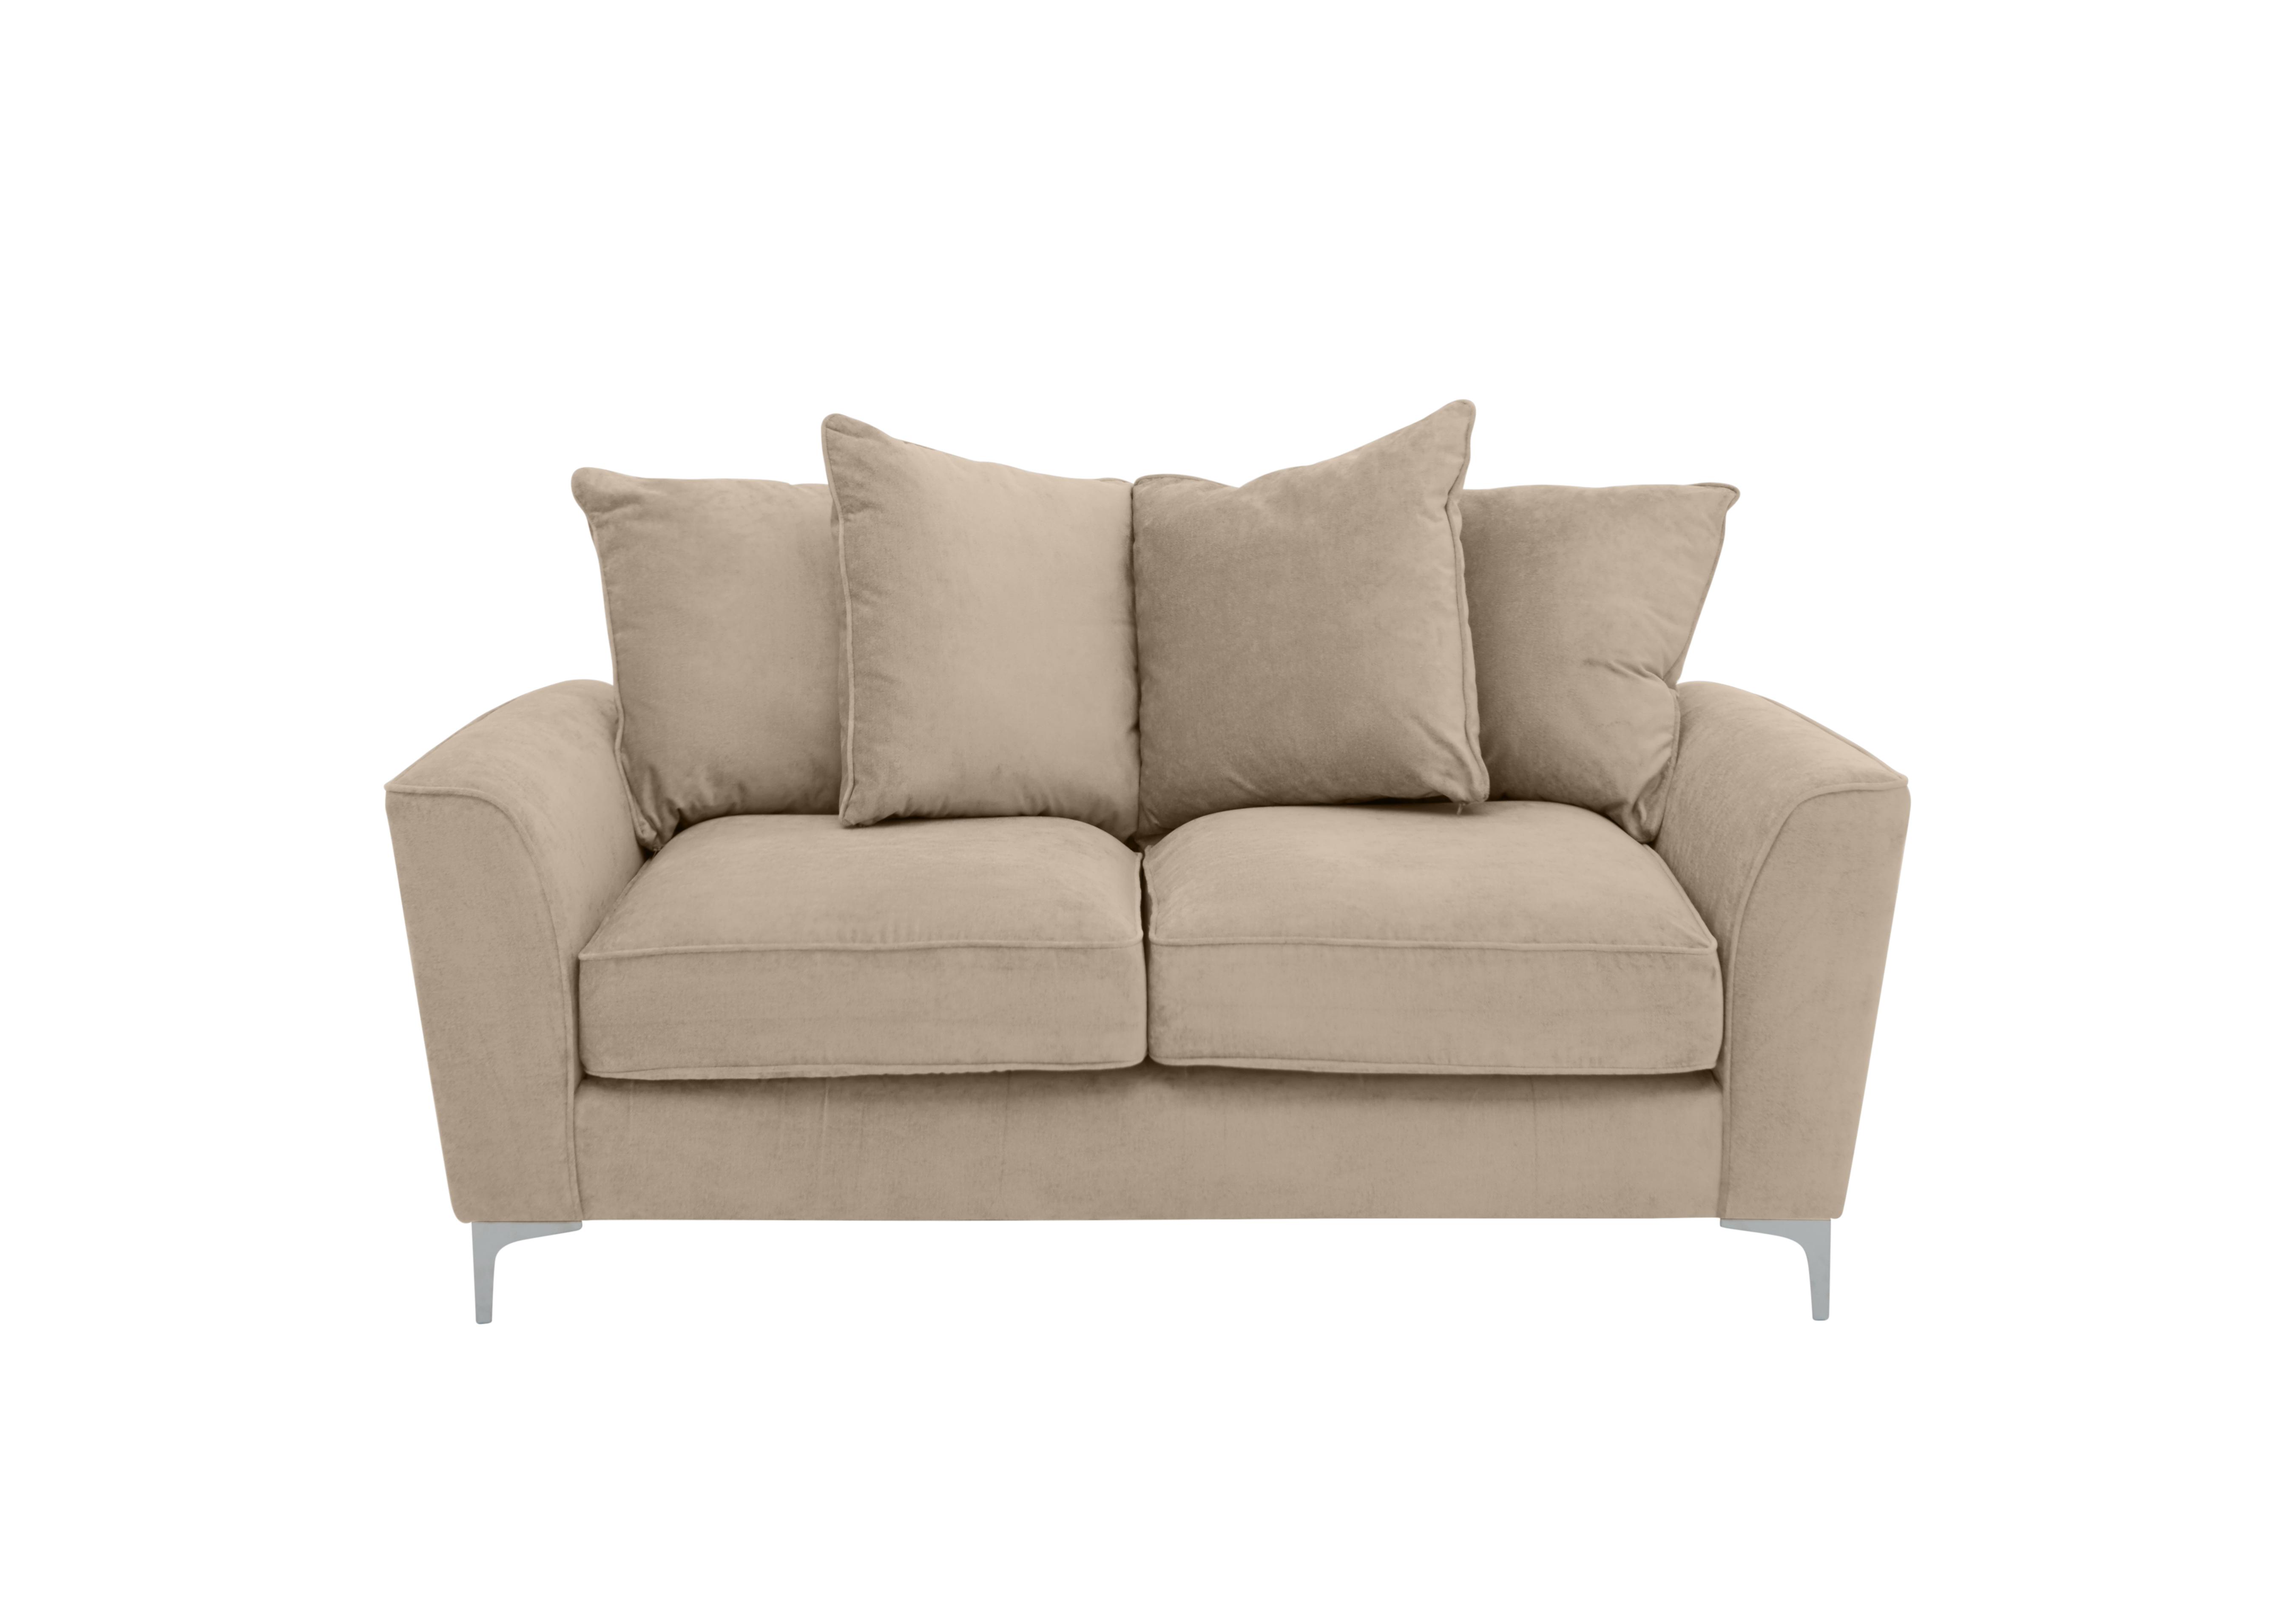 Legend 2 Seater Pillow Back Fabric Sofa in Kingston Beige on Furniture Village